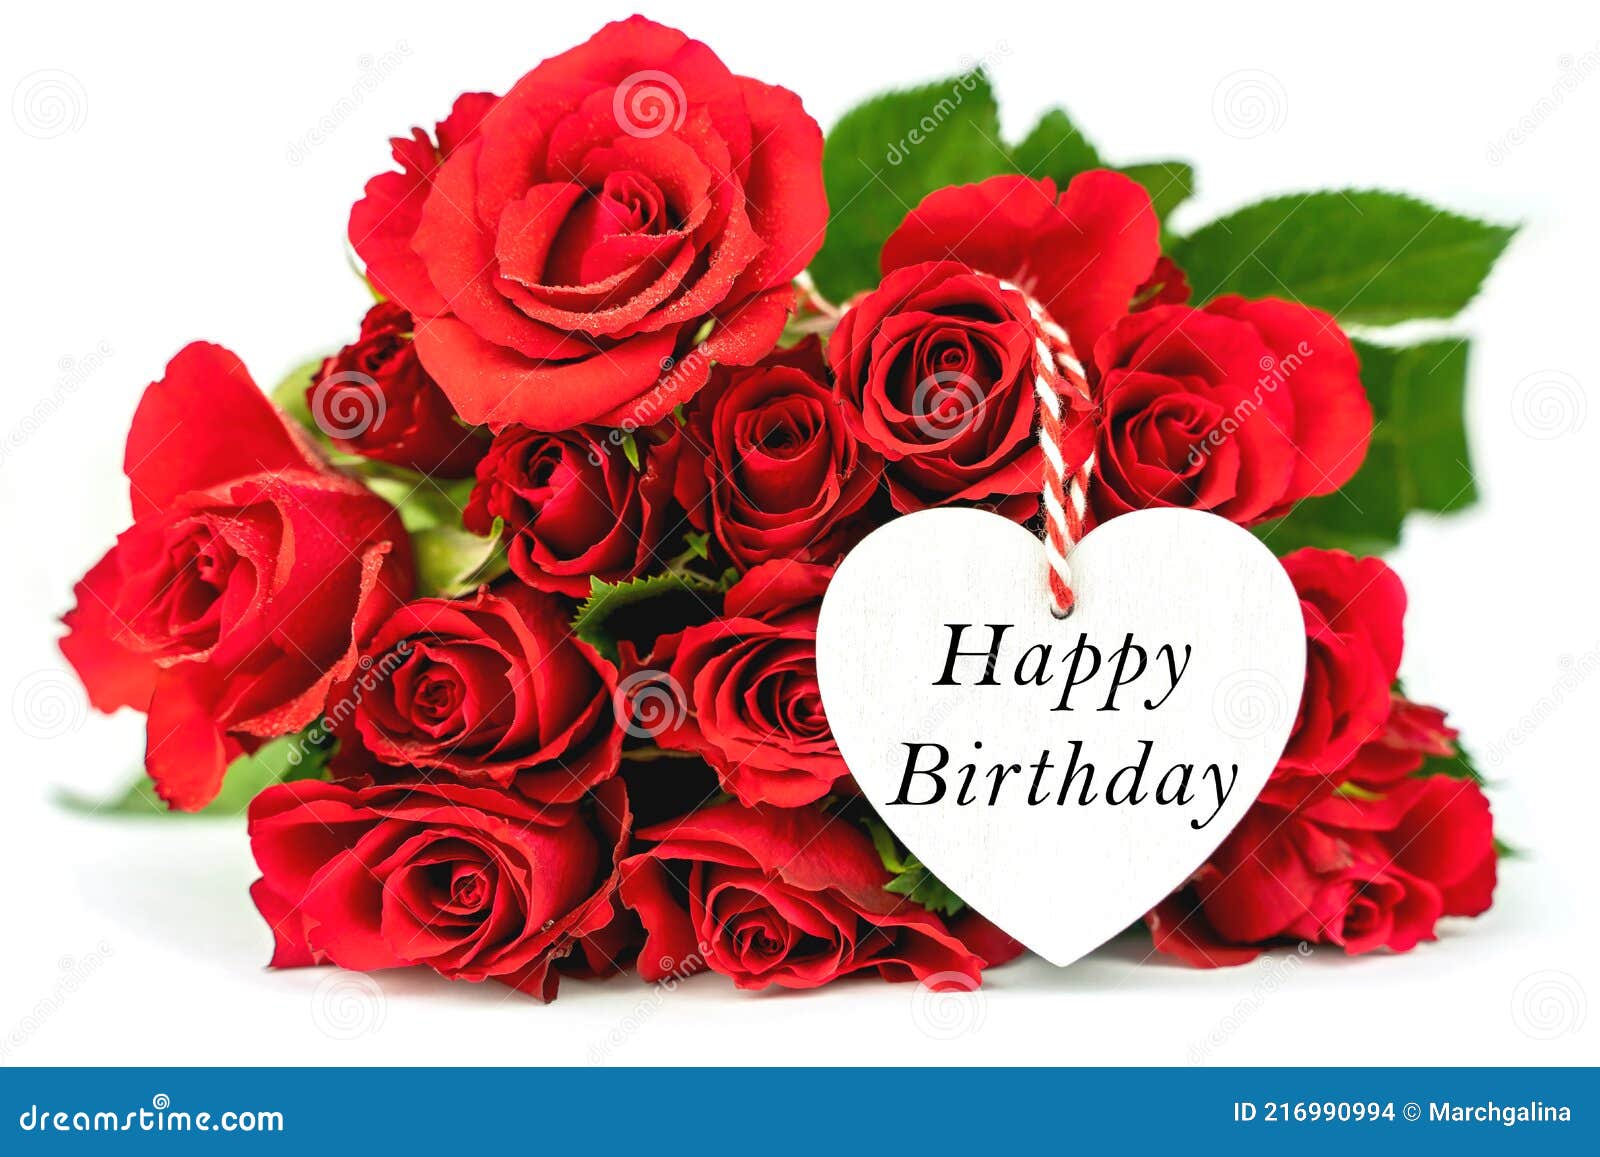 Beautiful Red Roses. Happy Birthday Greeting Card with Flowers Stock Photo - Image of passion, nature: 216990994